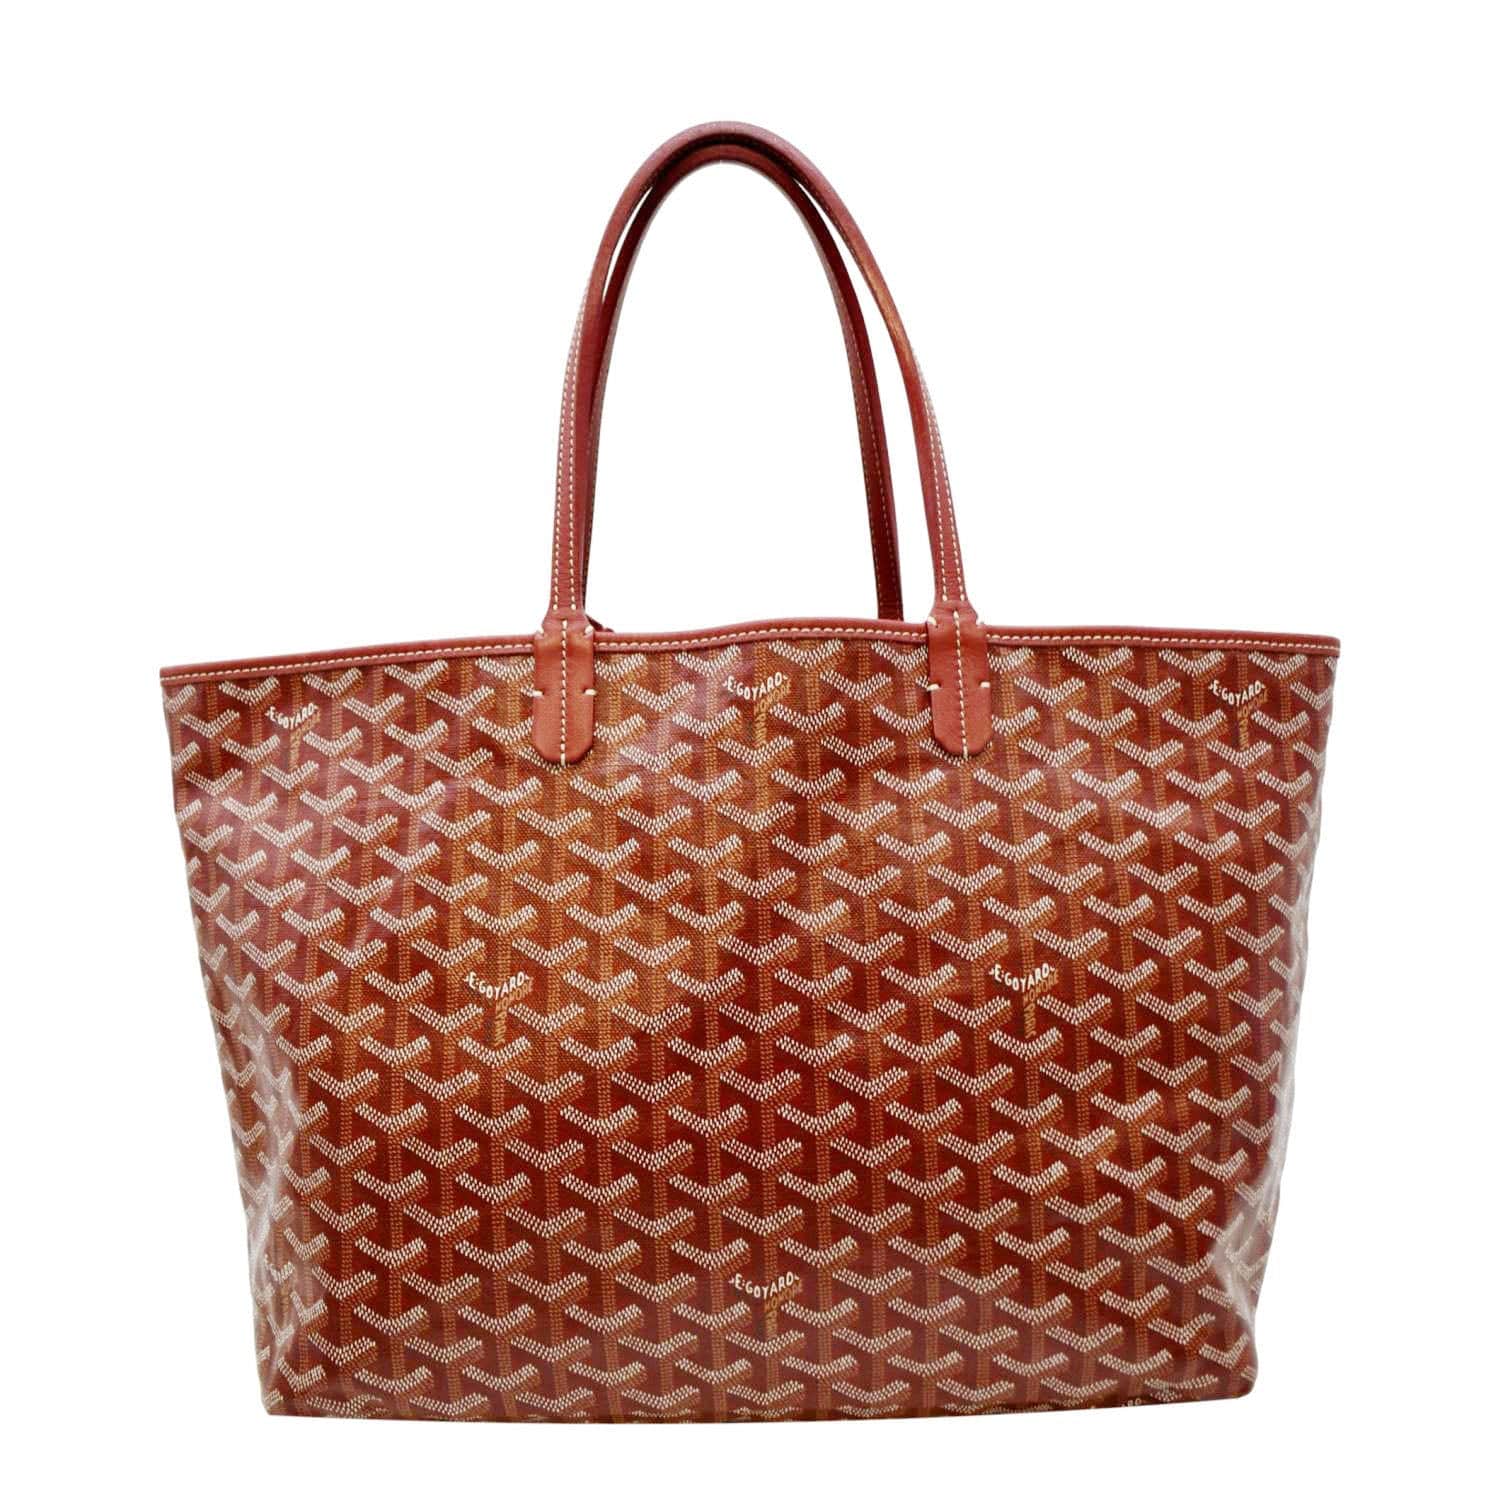 Goyard Large Tote Bags for Women, Authenticity Guaranteed